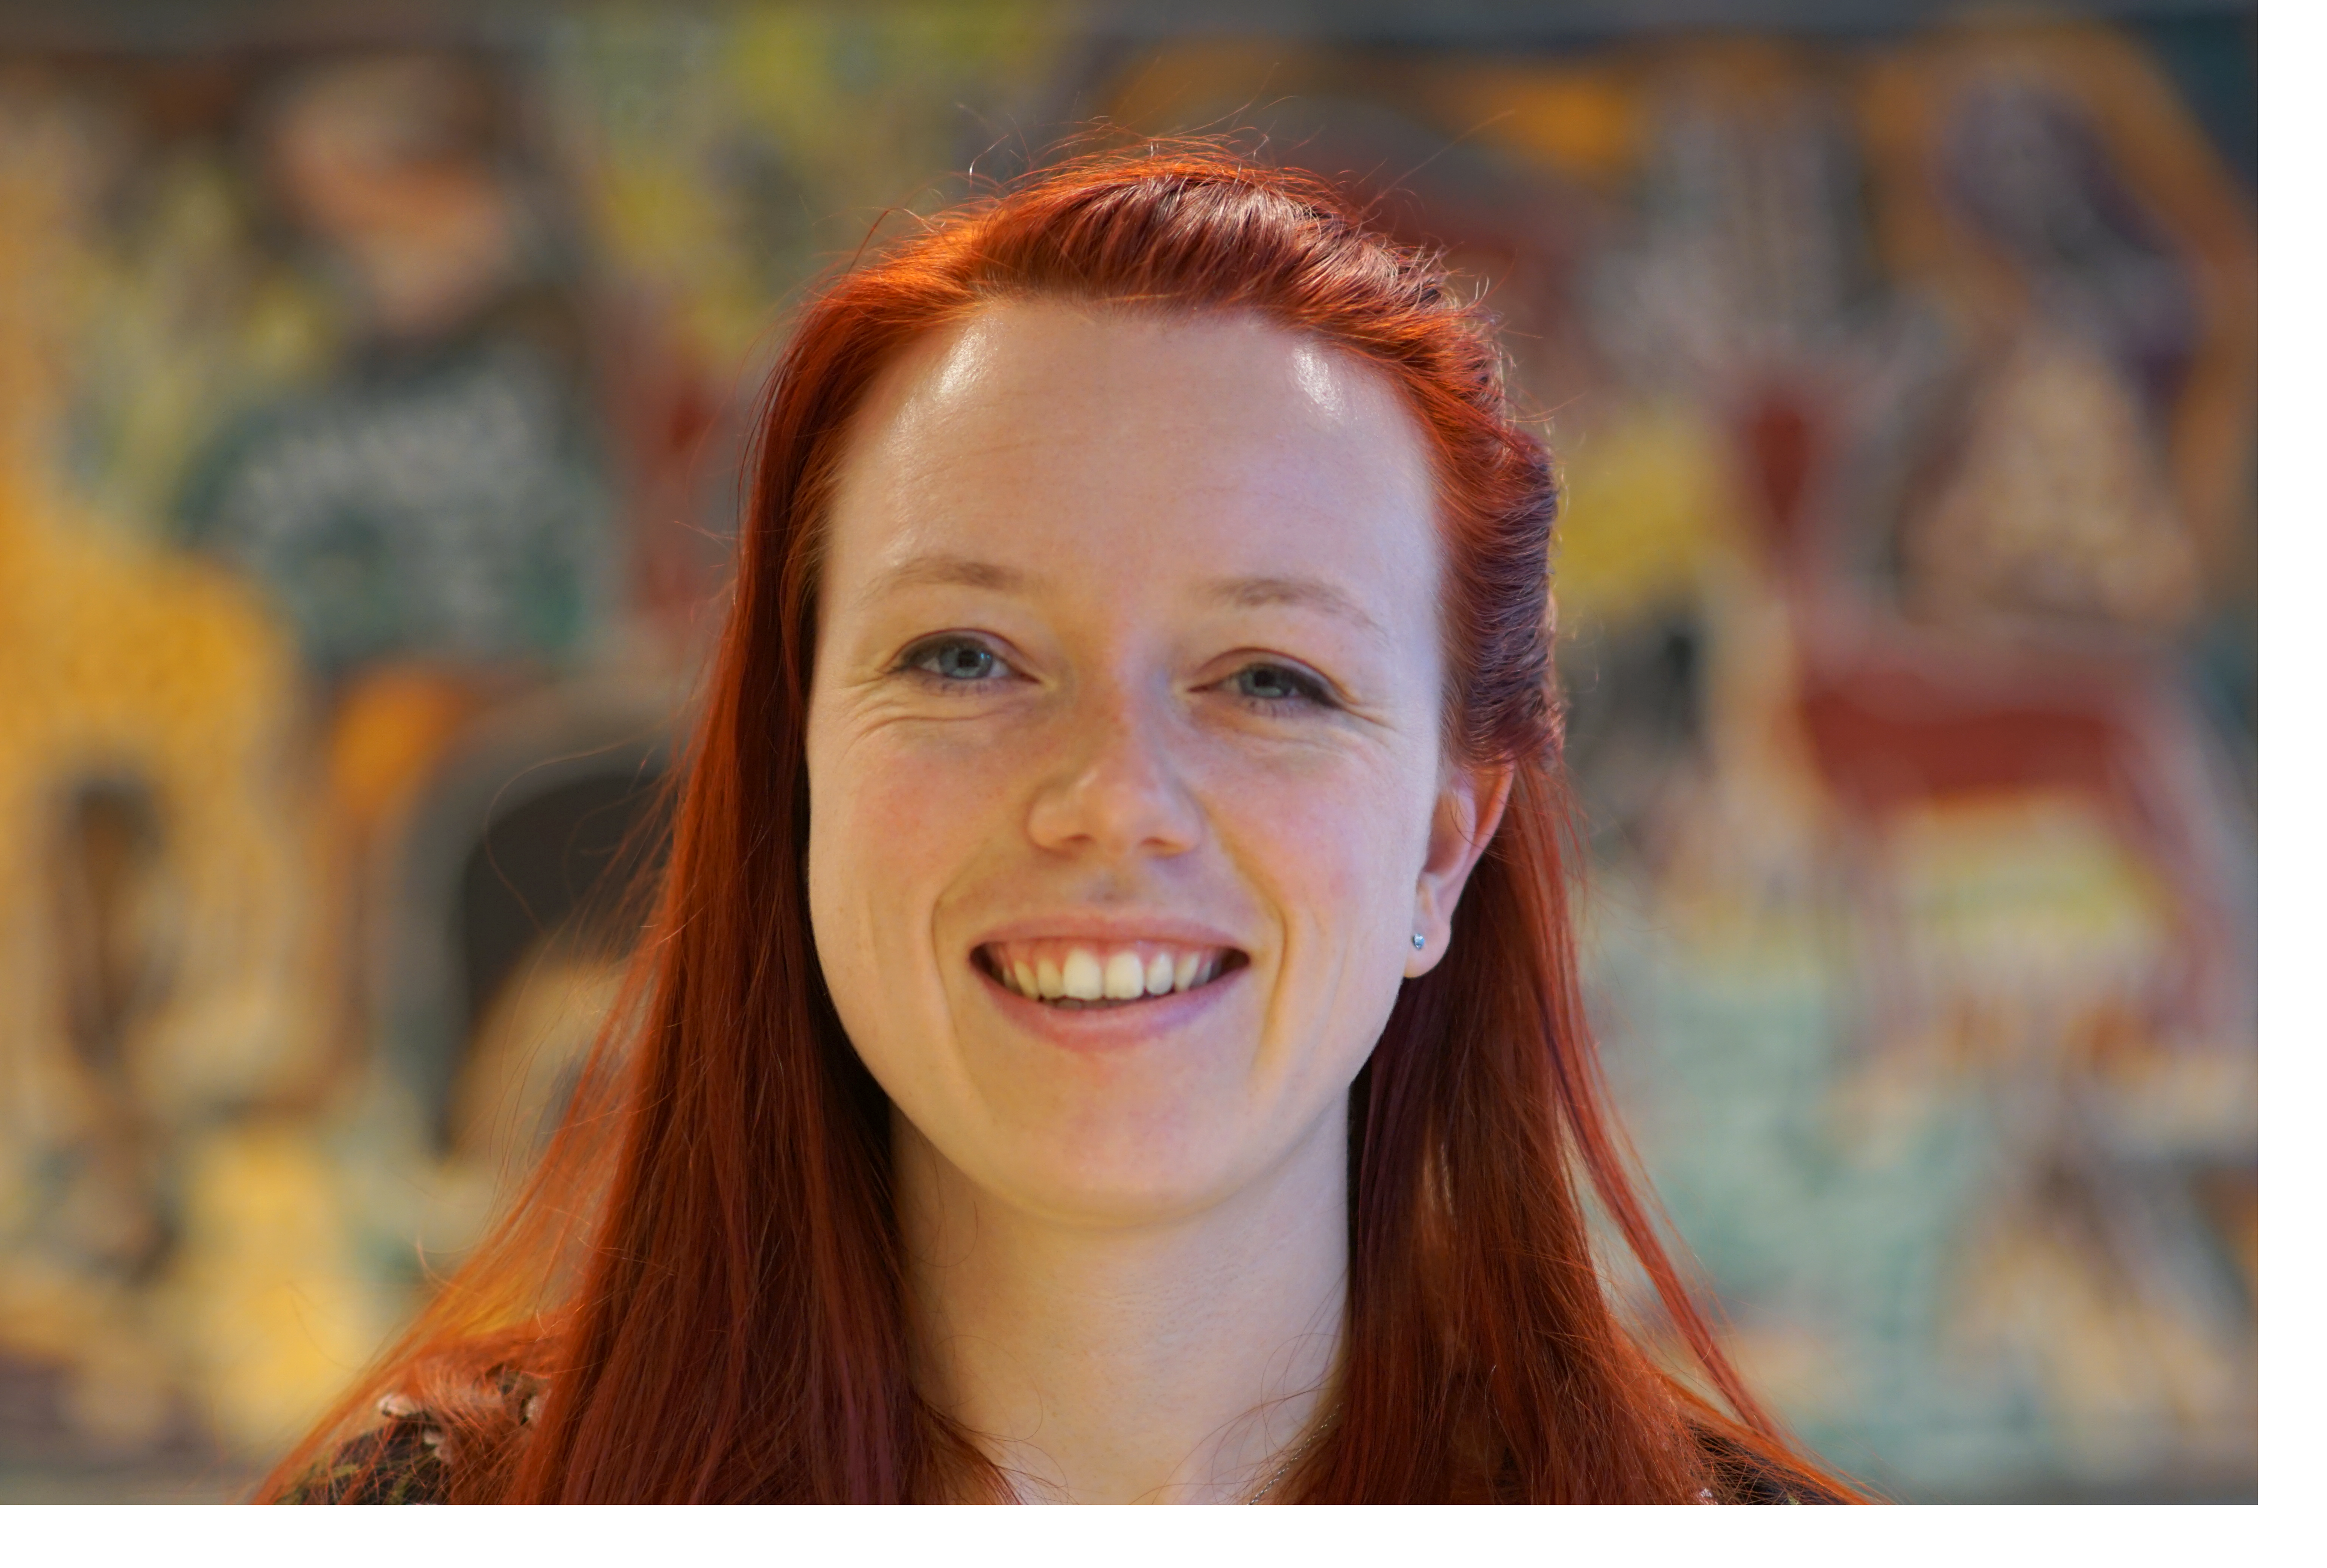 Broad-smiling woman with long red hair against a vaguely colourful background